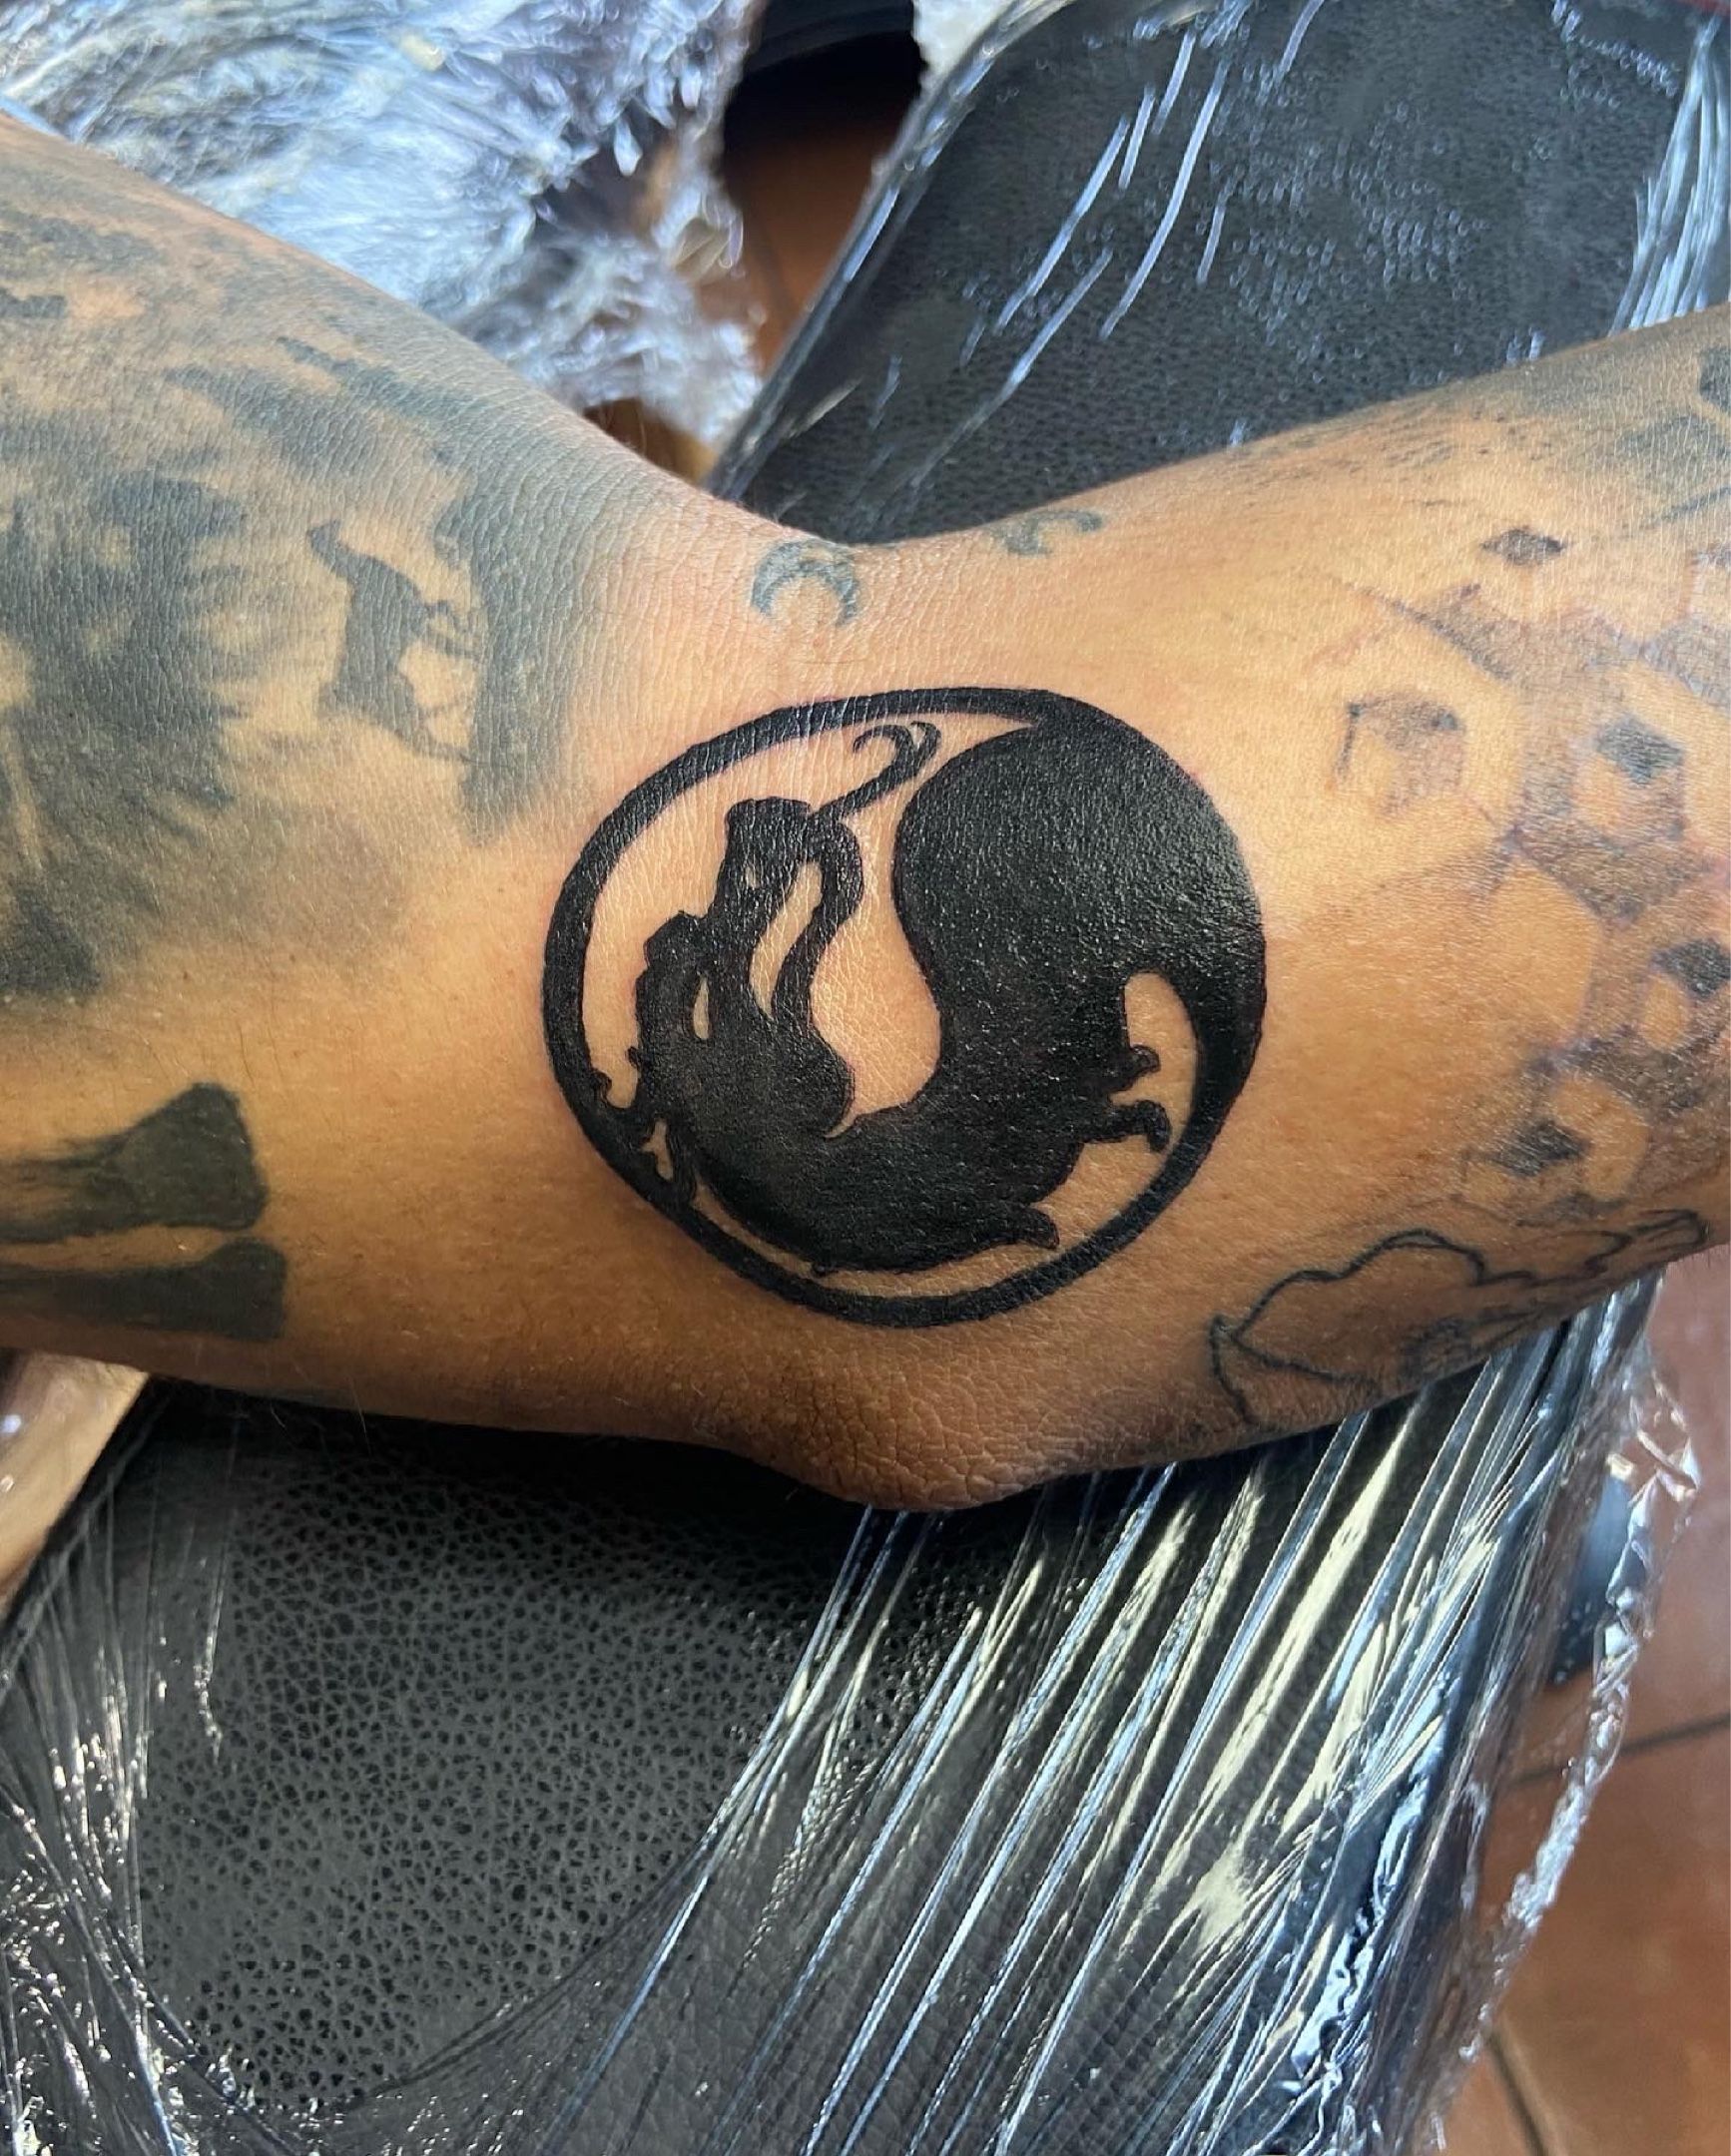 R13CH tattoo  Mortal kombat cover up done today Feel  Facebook